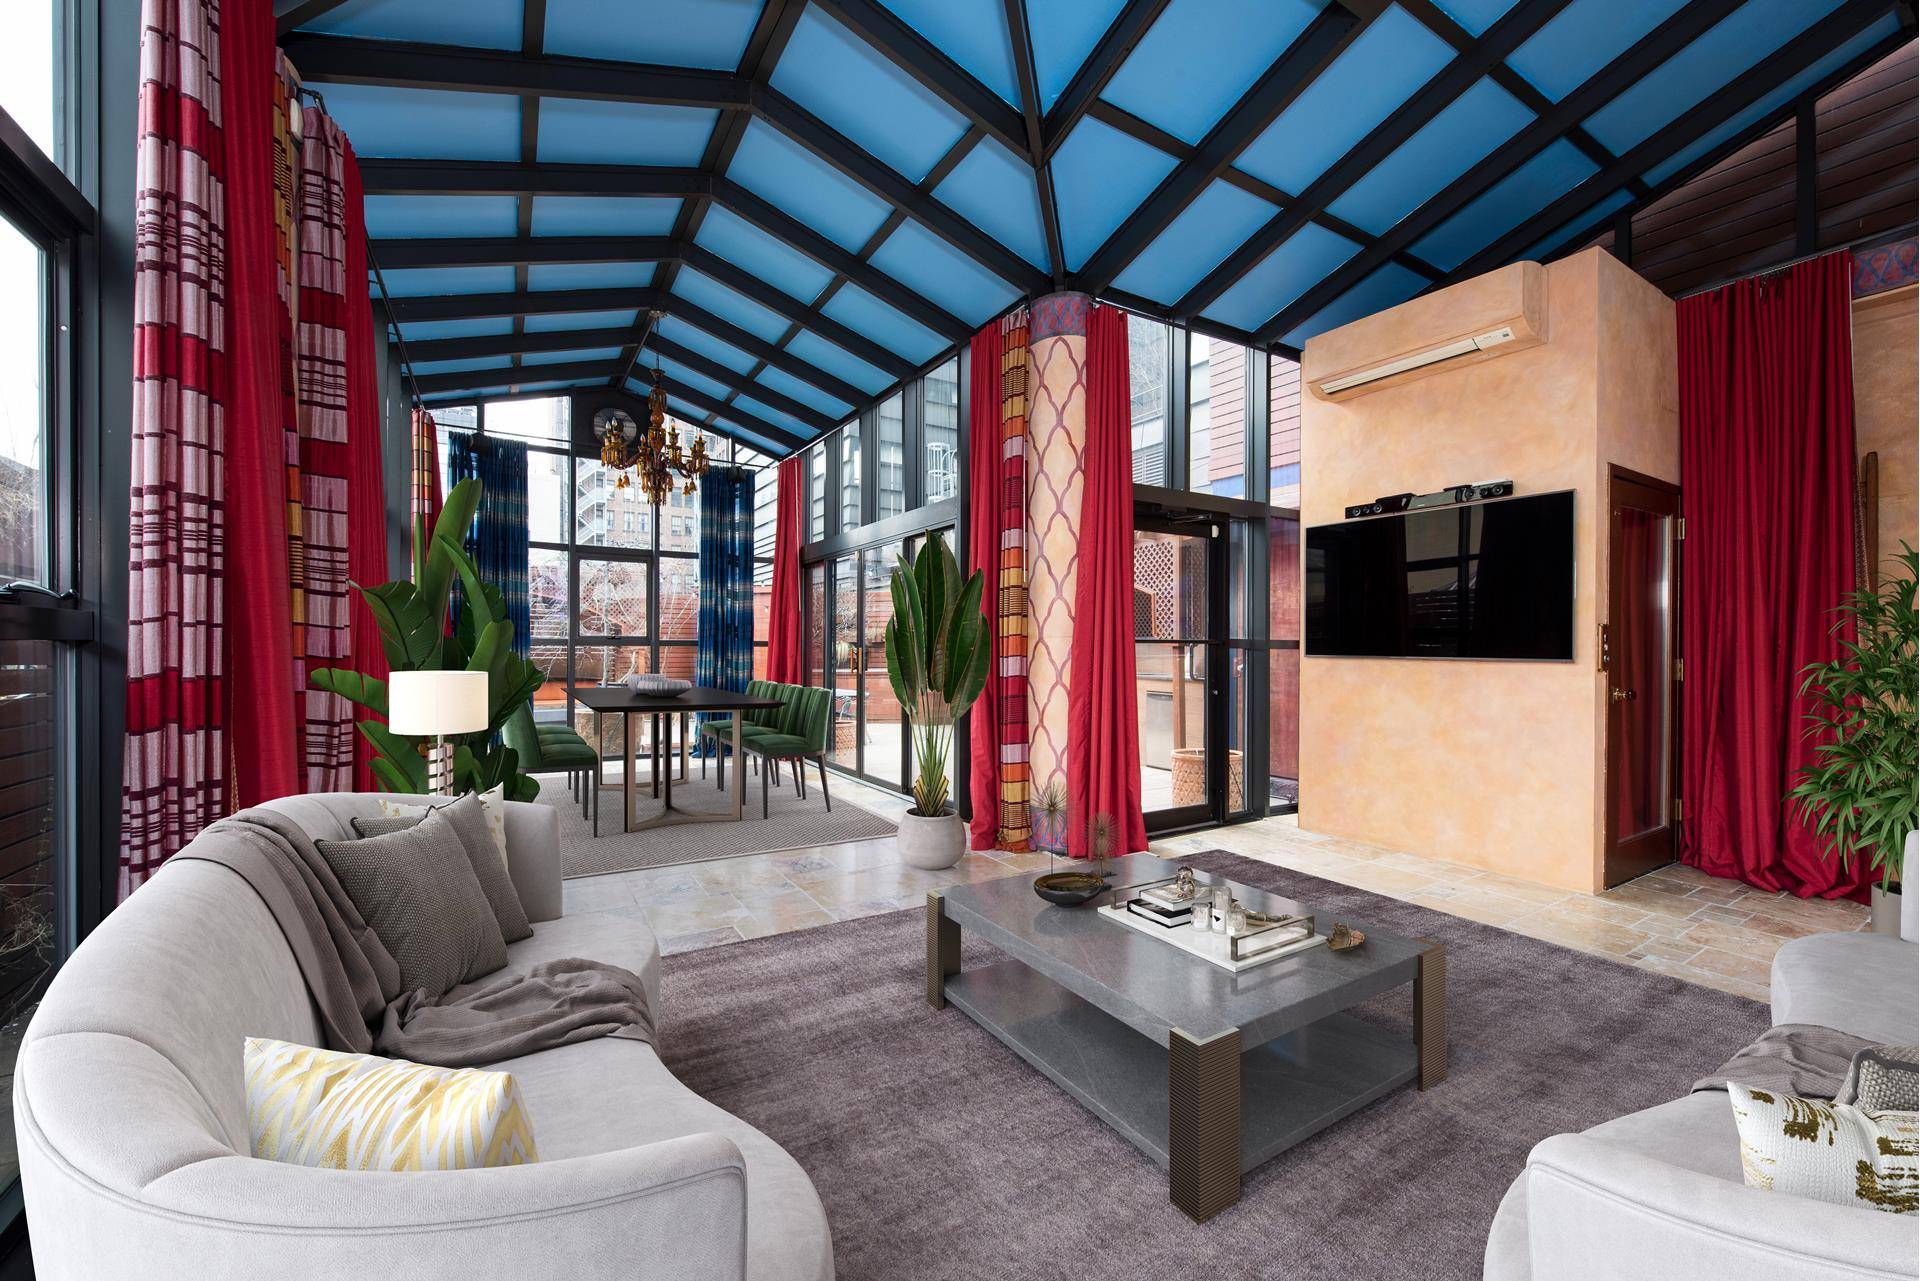 SUBLIME OUTDOOR OASIS ! Just in time for Spring, don't miss out on this one of a kind, penthouse duplex home with approximately 5000 total square feet indoors and outdoors ...